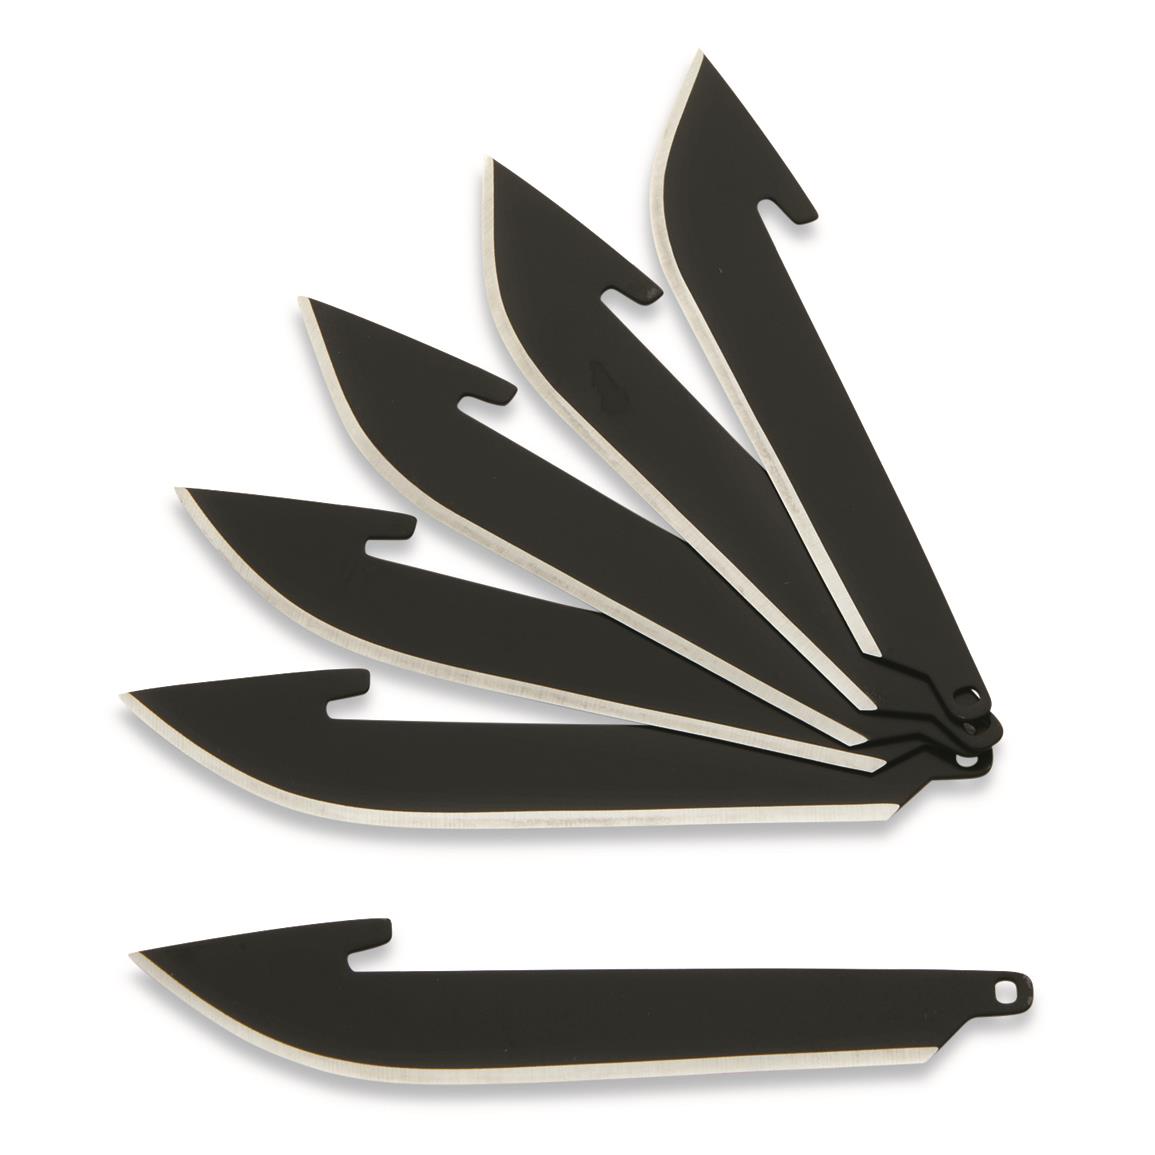 Outdoor Edge 3.0 Drop-Point Blade Pack, Black Oxide, 6 Pack - 734054,  Field Care Knives at Sportsman's Guide